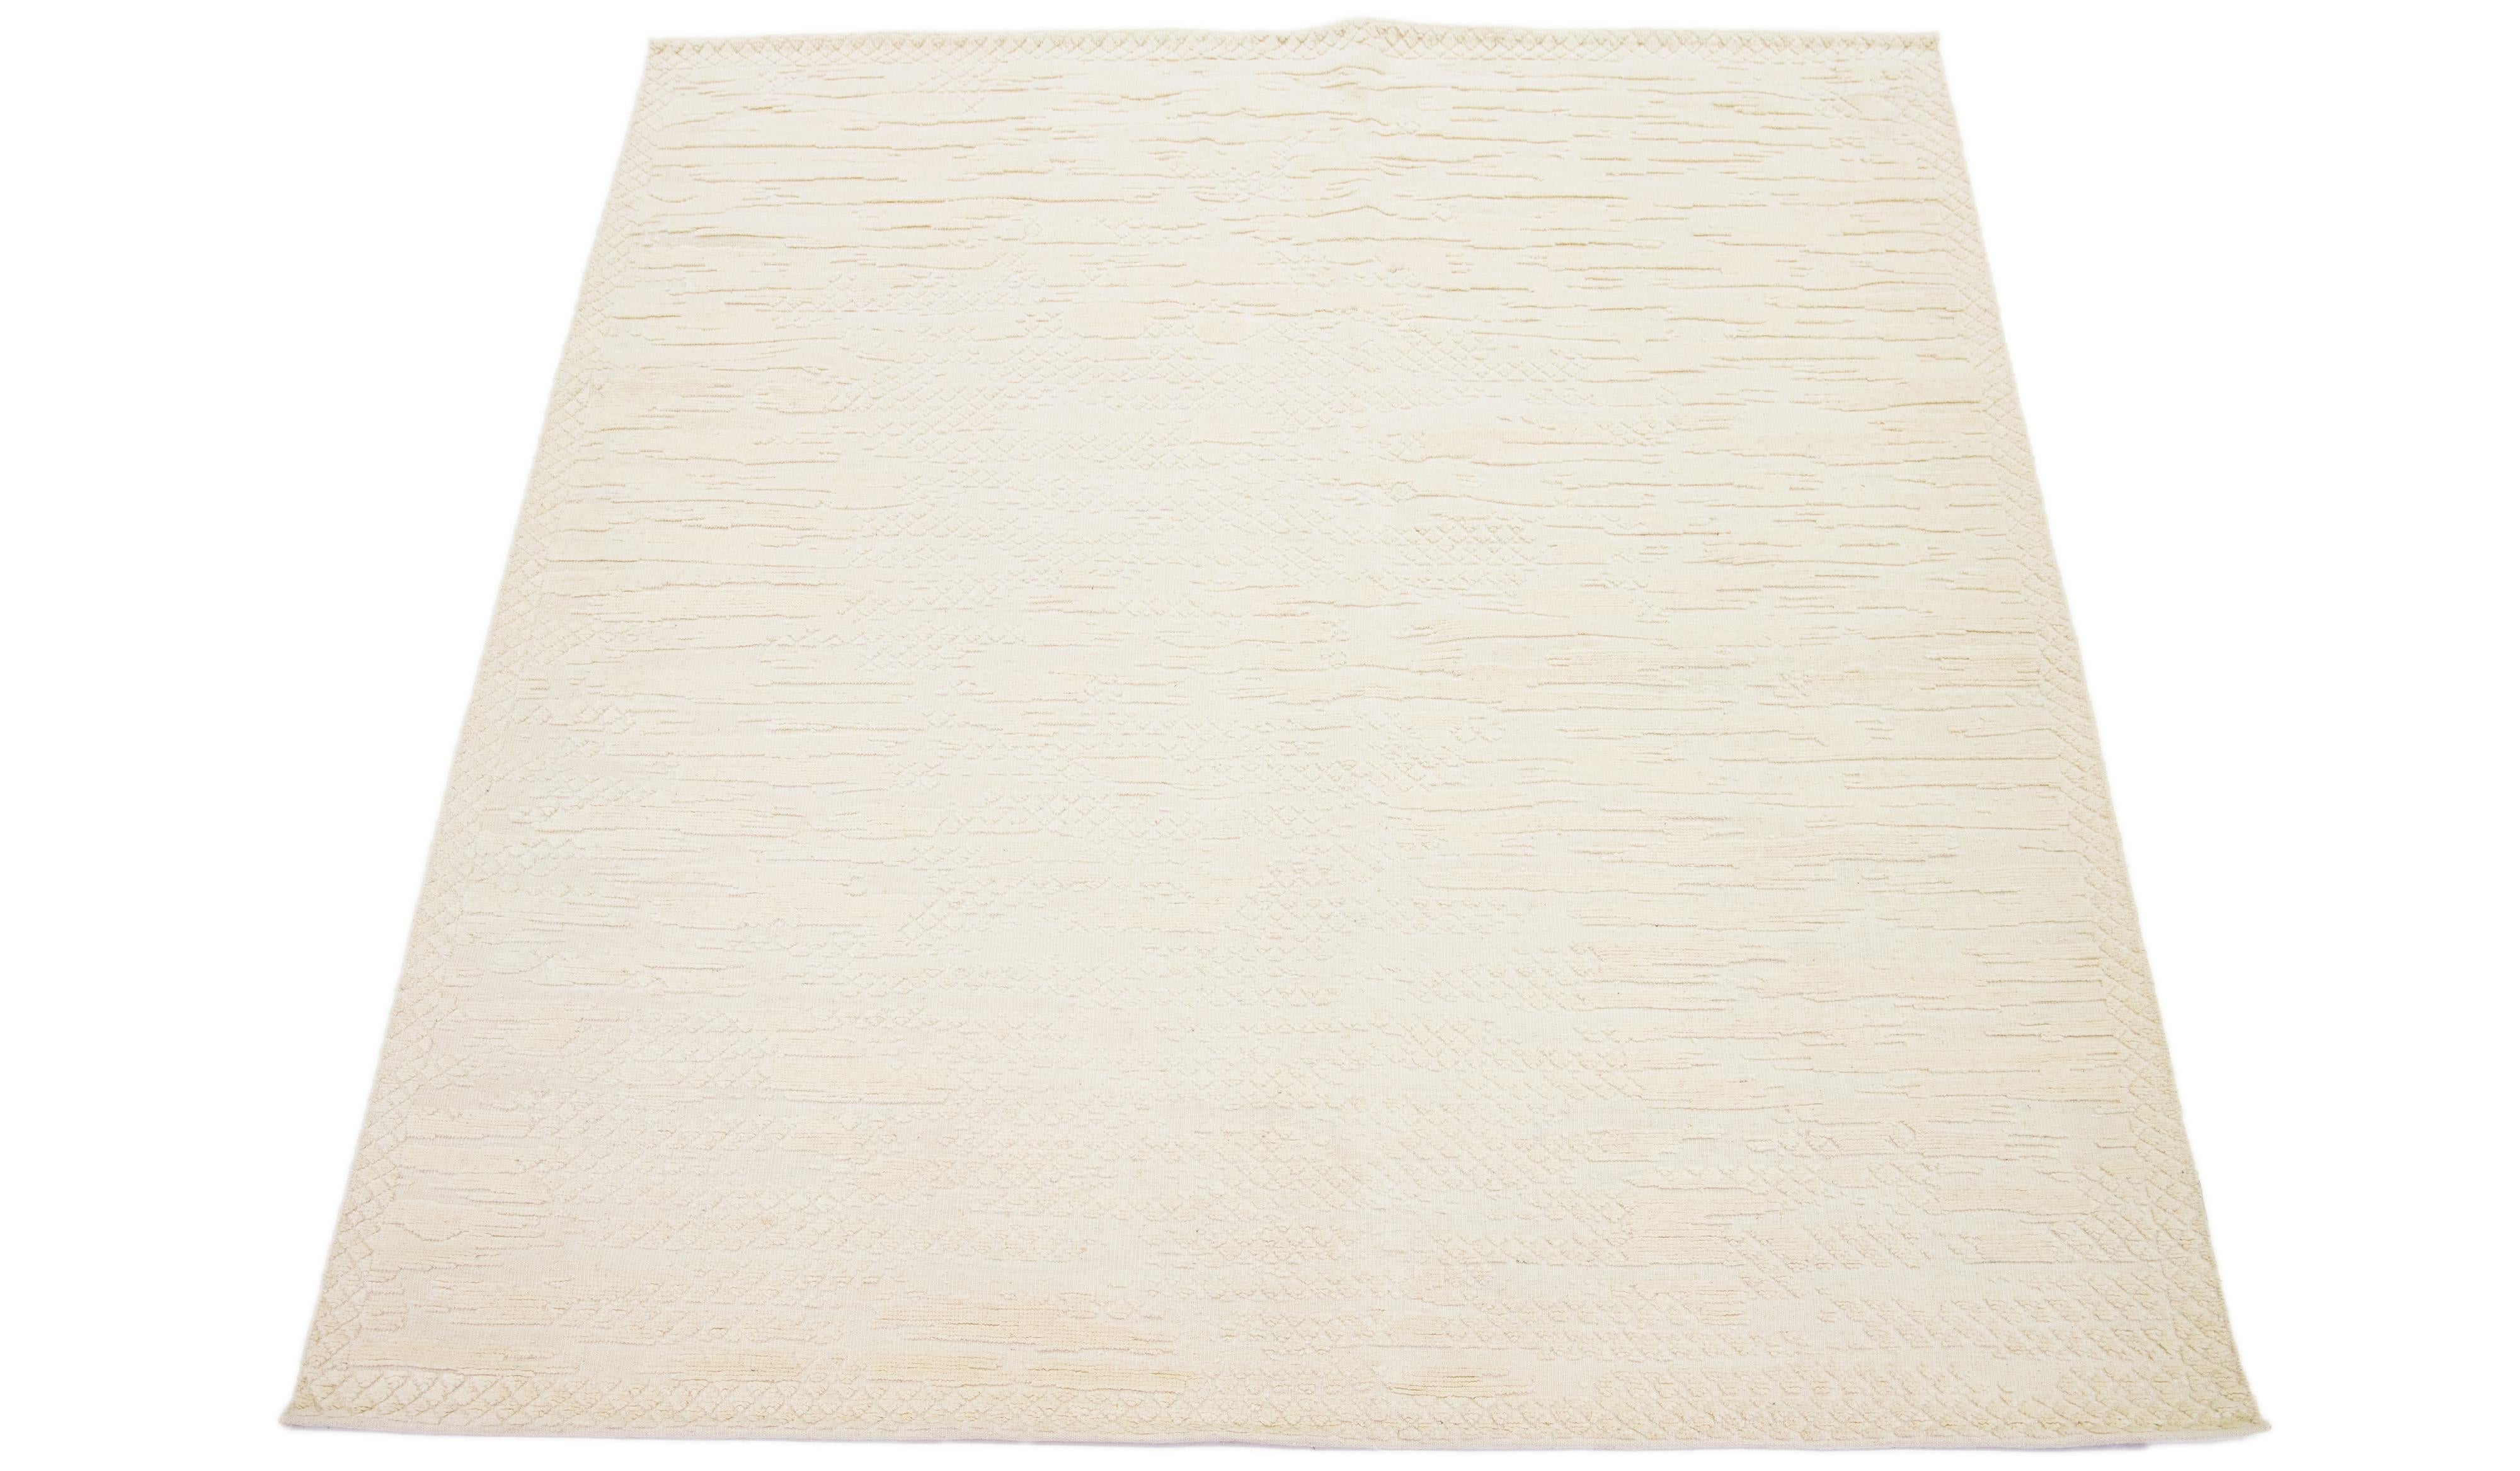 Beautiful modern Moroccan-style hand-knotted wool rug with a natural beige field. This rug is part of our Apadana's Safi Collection and features an abstract design.

This rug measures 7'10